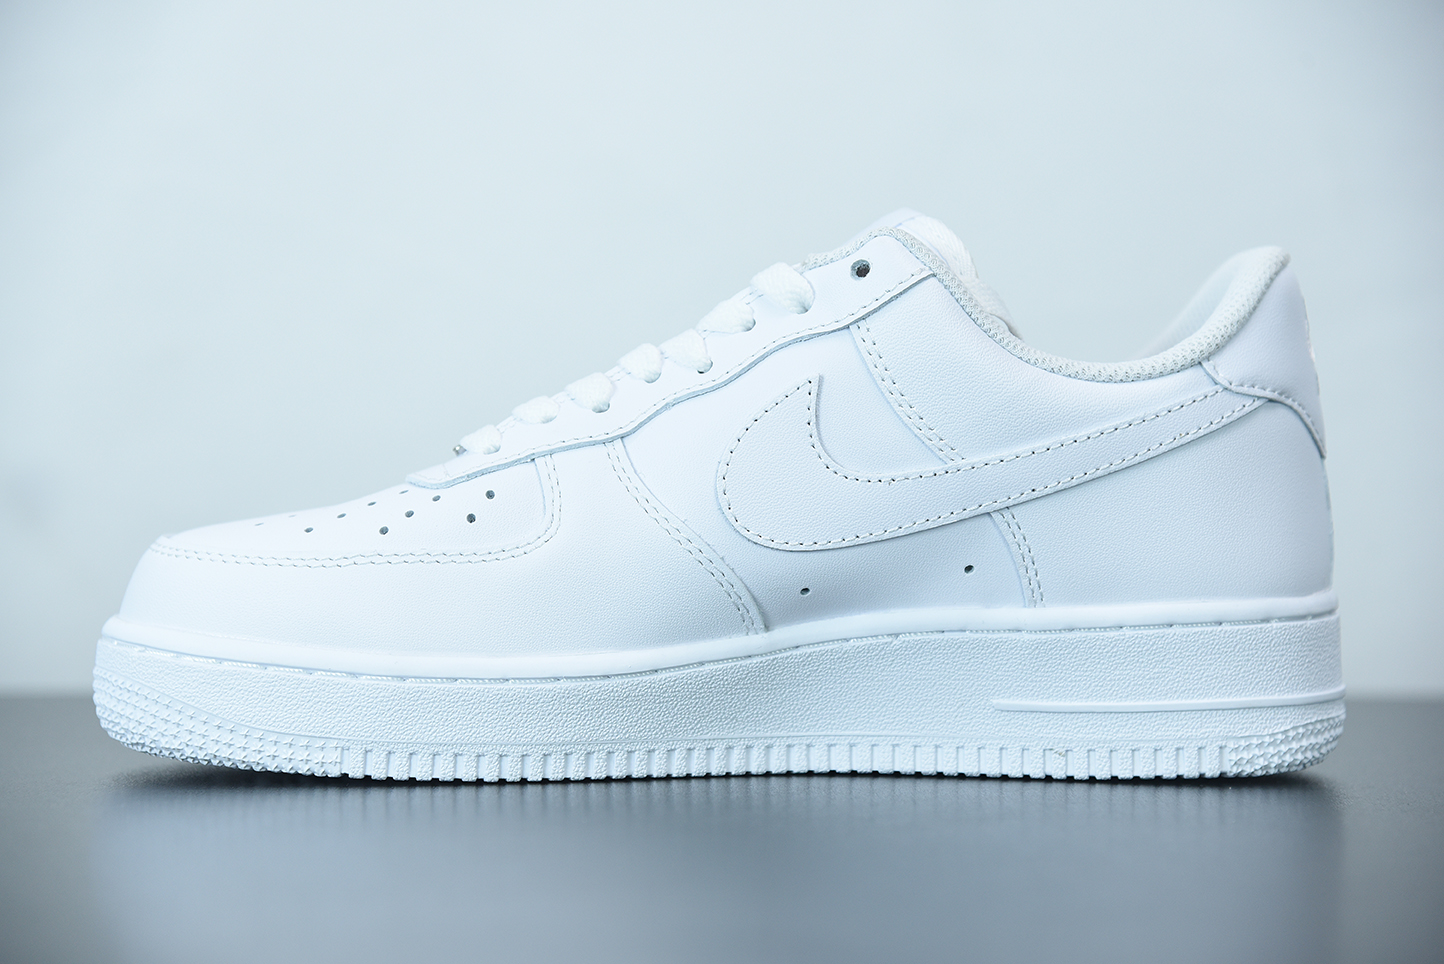 Nike Air Force 1 Low 07 “White on White” 315122 - black air max 1s price in nepal 111 – Tra-incShops